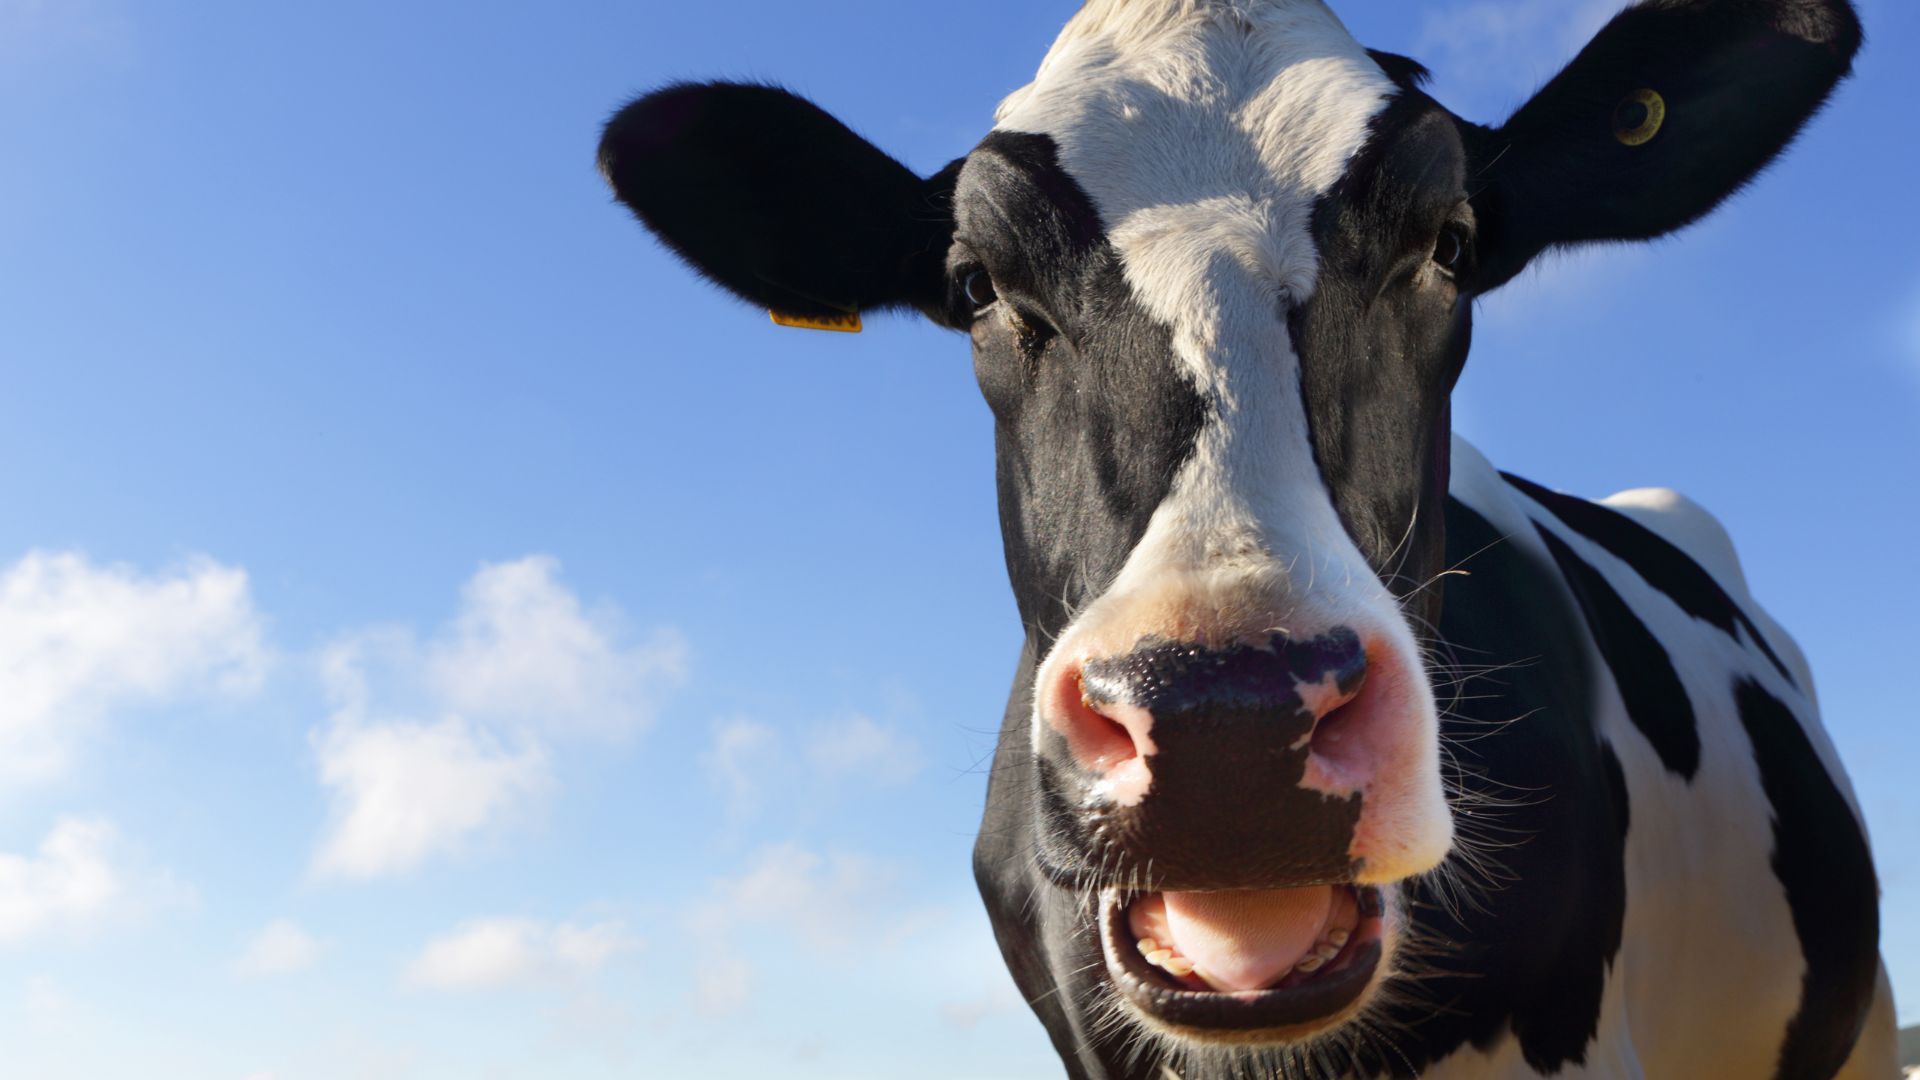 Cows fed hemp act stoned and produce milk containing THC | Live Science